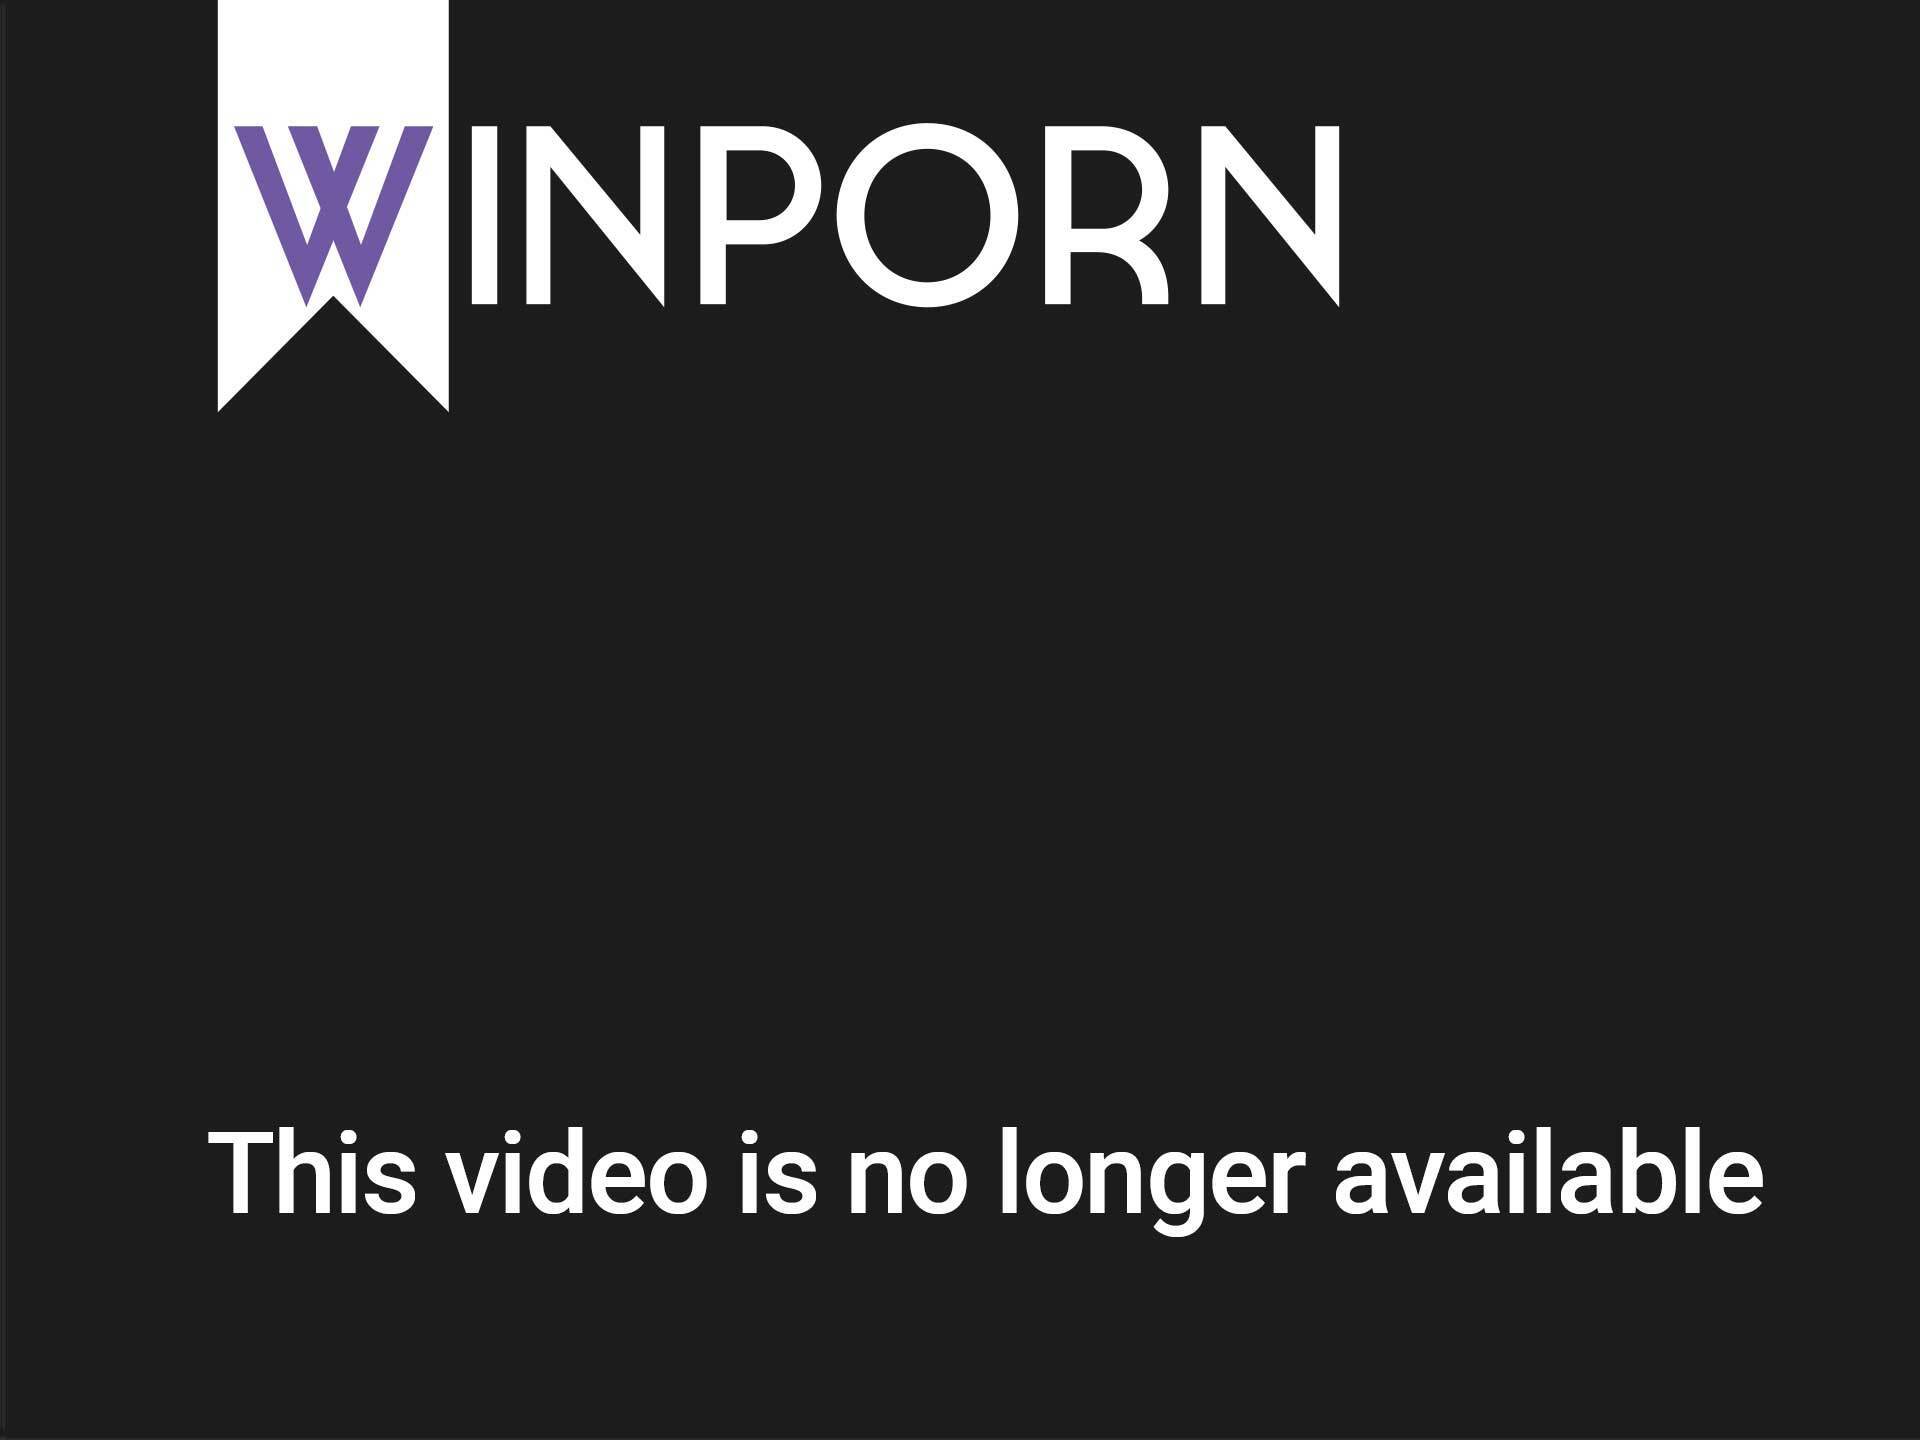 Xxxii Hd Full Fat Video Downloding - Download Mobile Porn Videos - Kinky Milf Is Fucked By Fat Cock While She  Does Blowjob - 529879 - WinPorn.com